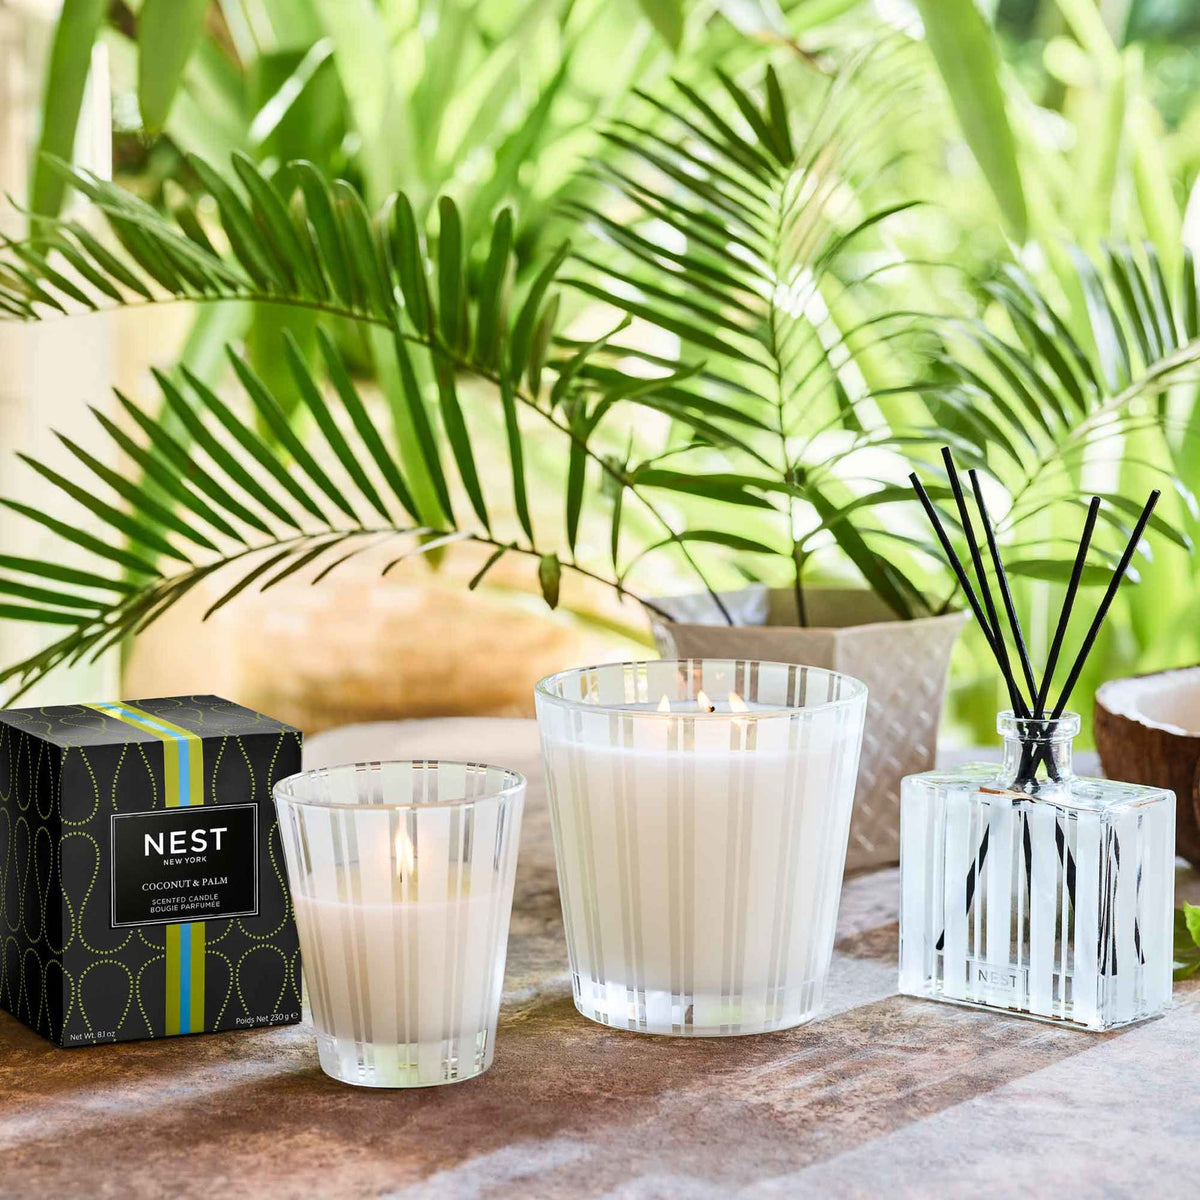 Nest Coconut and Palm Reed Diffuser .